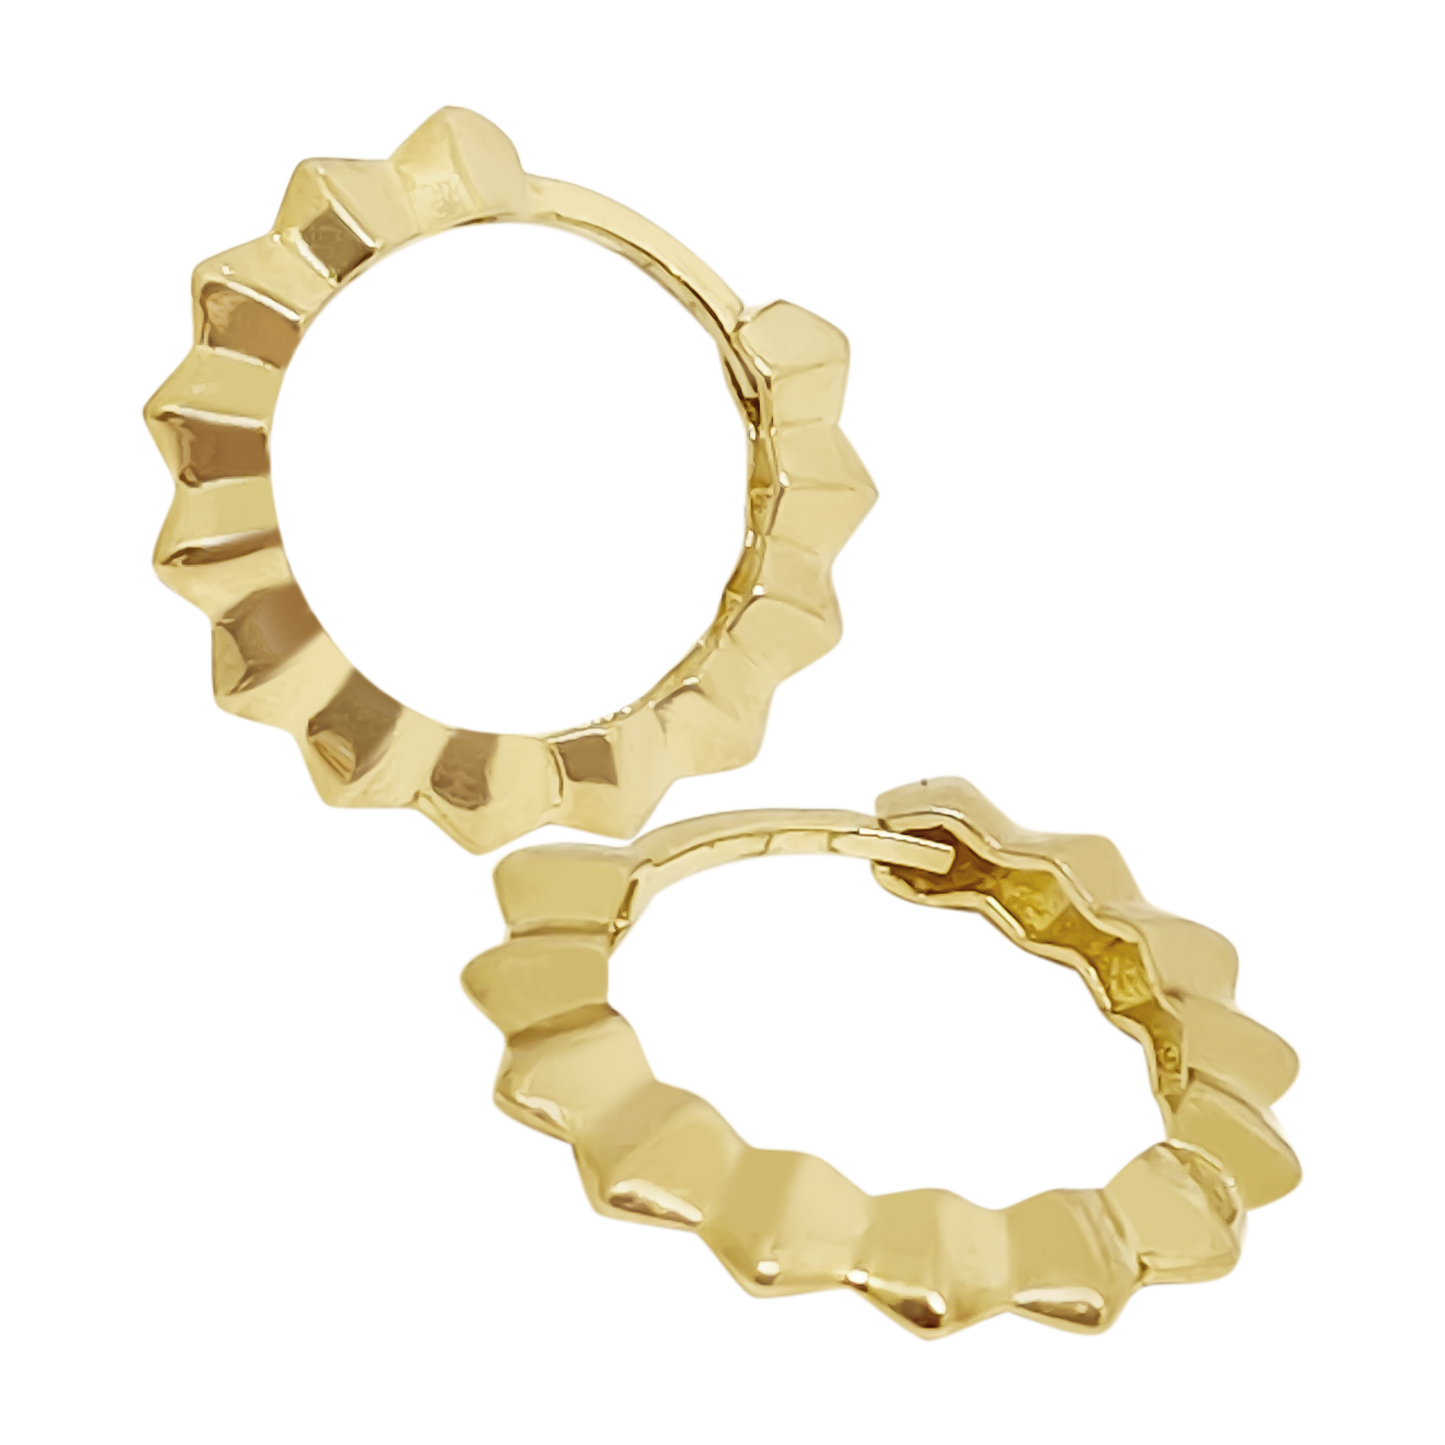 1.8cm Sunsonite Style Hoops in 9ct Yellow Gold